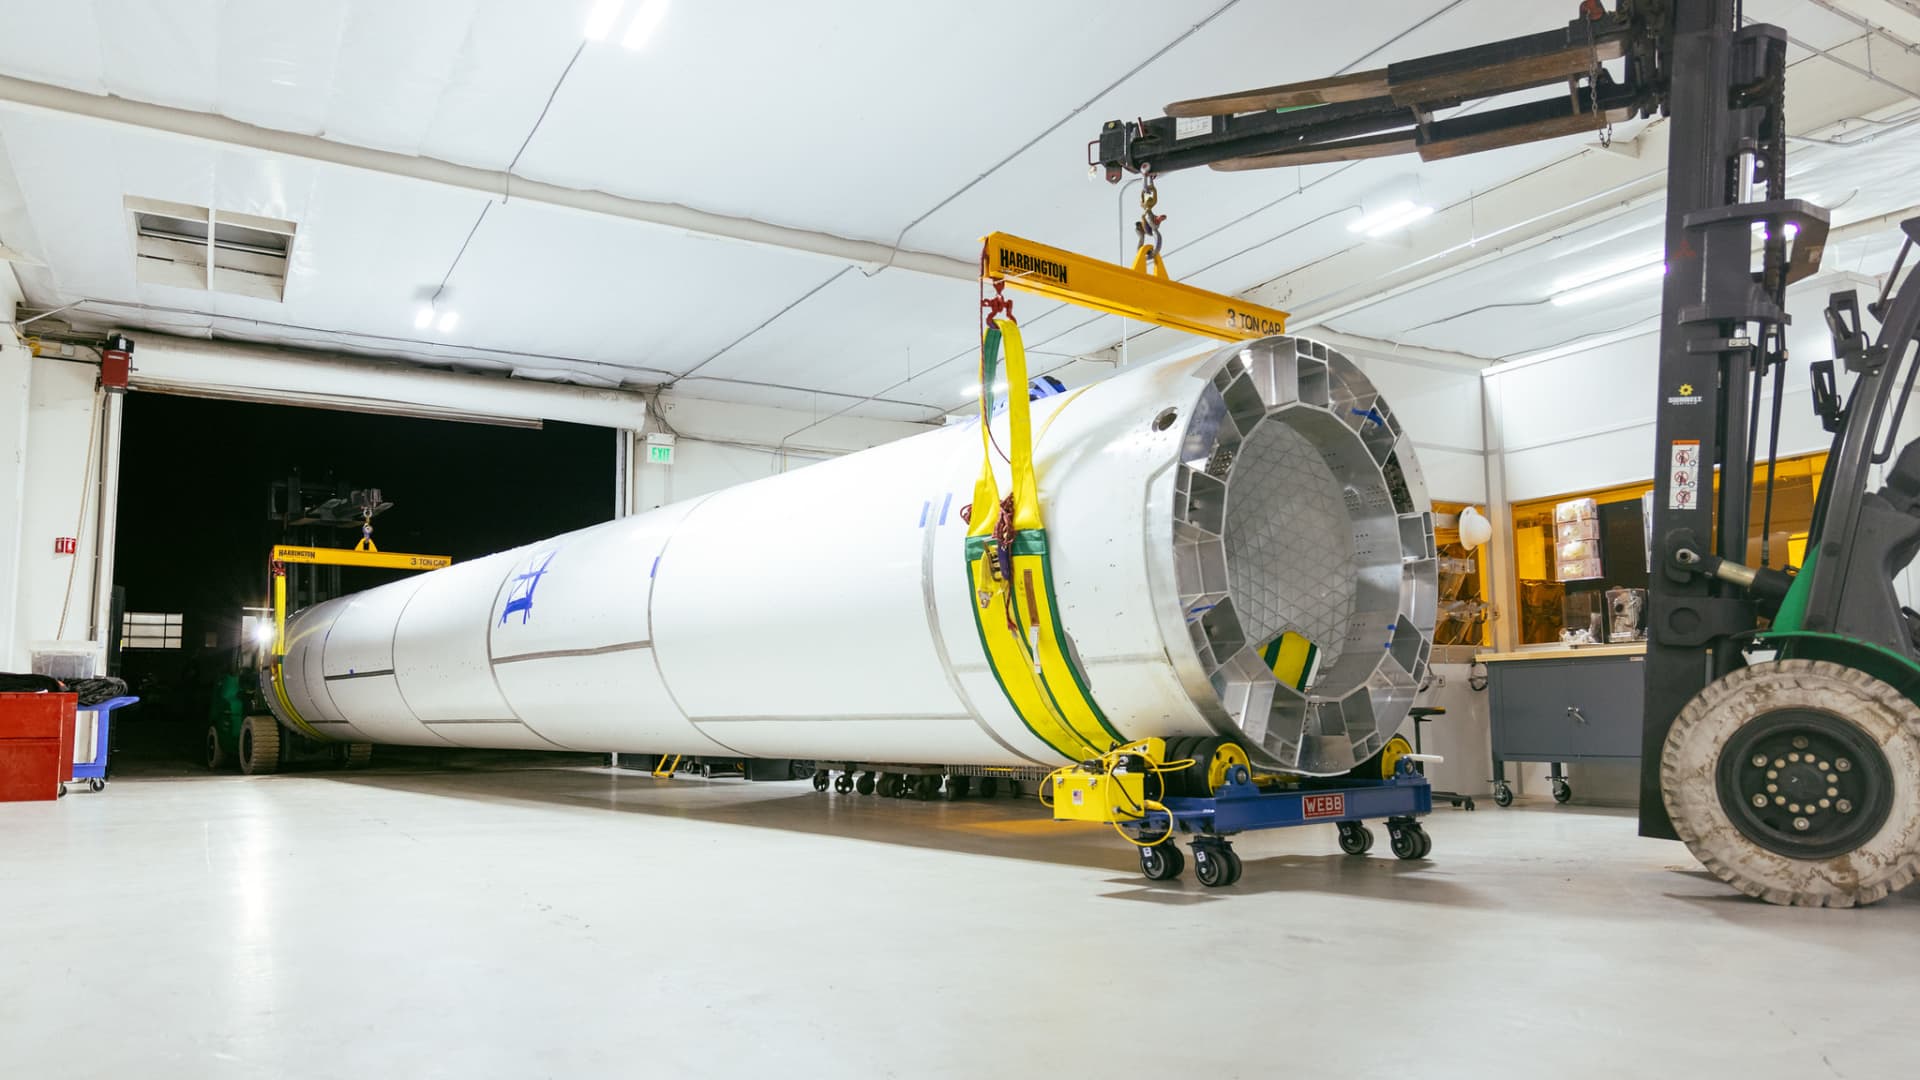 An RS1 rocket booster is shipped out of the company's headquarters in El Segundo, California.